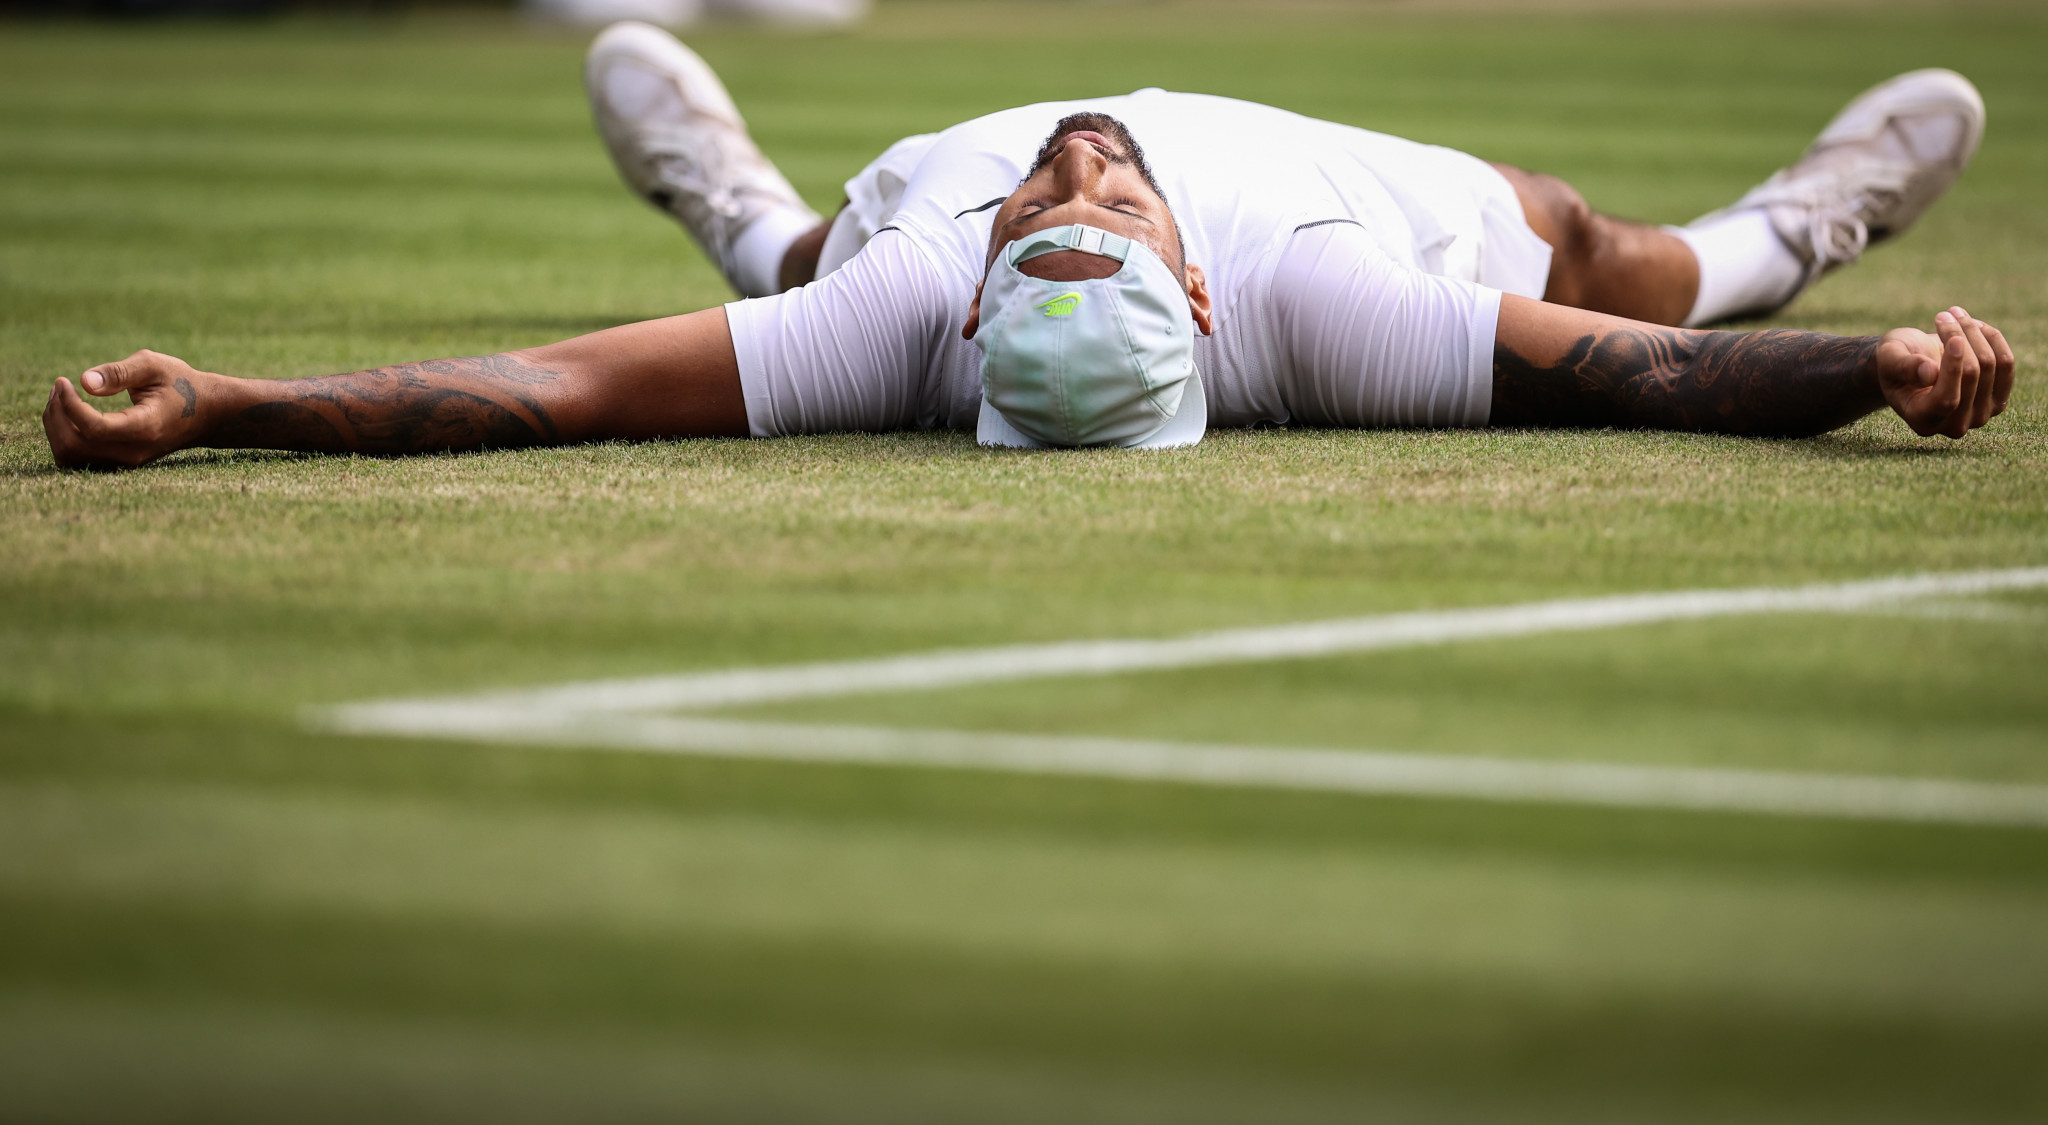 Nick Kyrgios lying down on the lawn after defeating Cristian Garin ©Getty Images